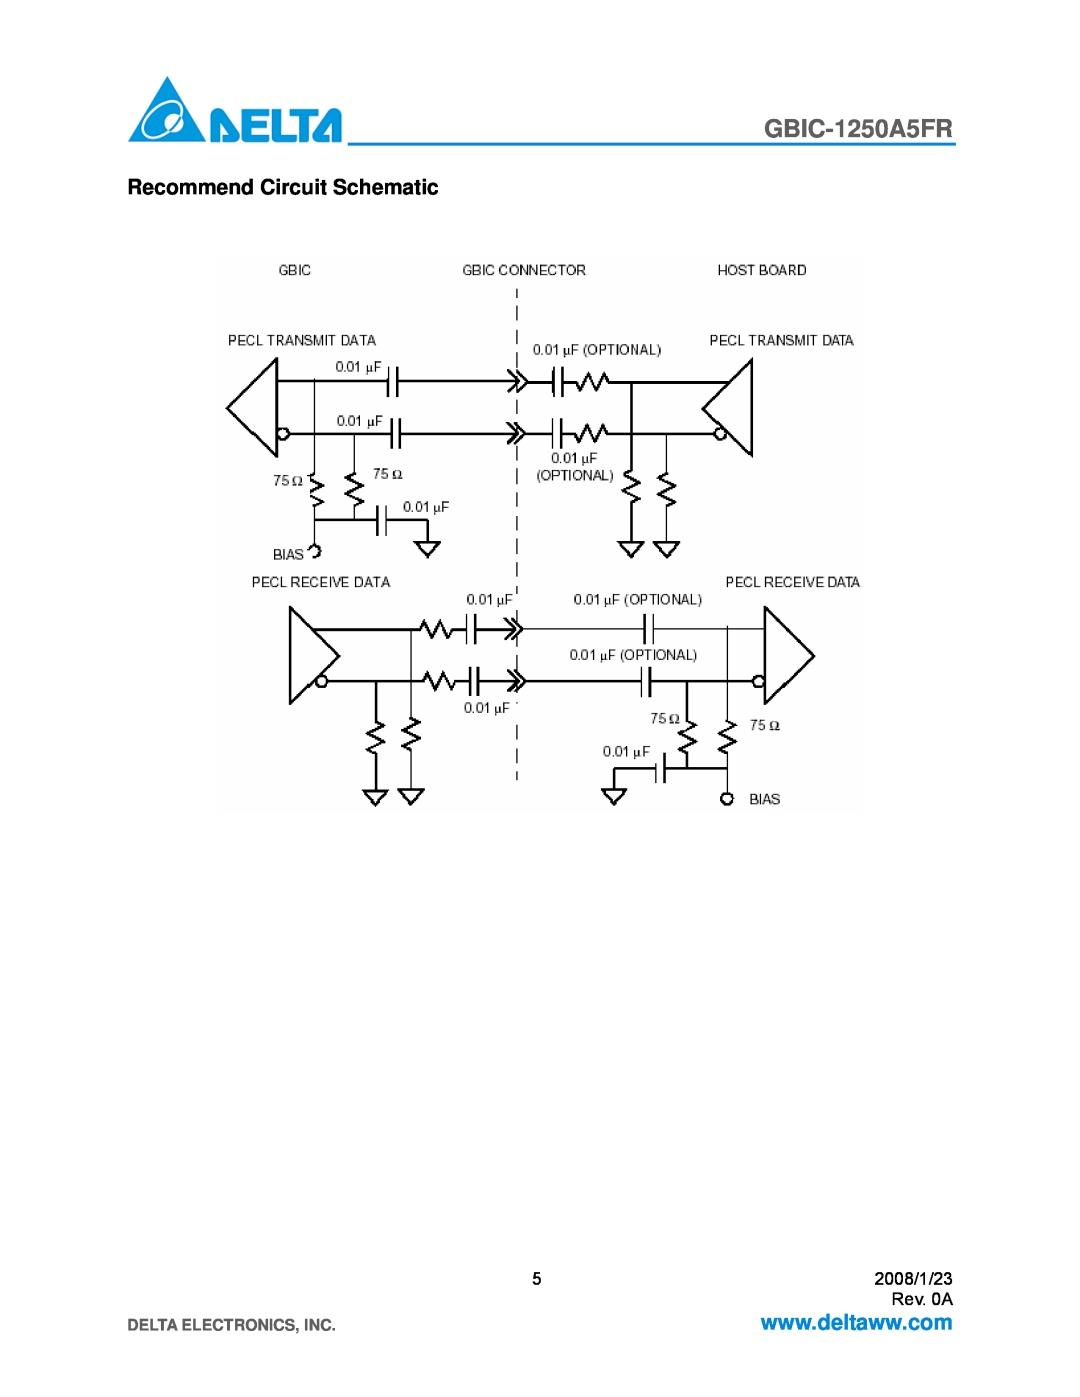 Delta Electronics GBIC-1250A5FR specifications Recommend Circuit Schematic, Delta Electronics, Inc 